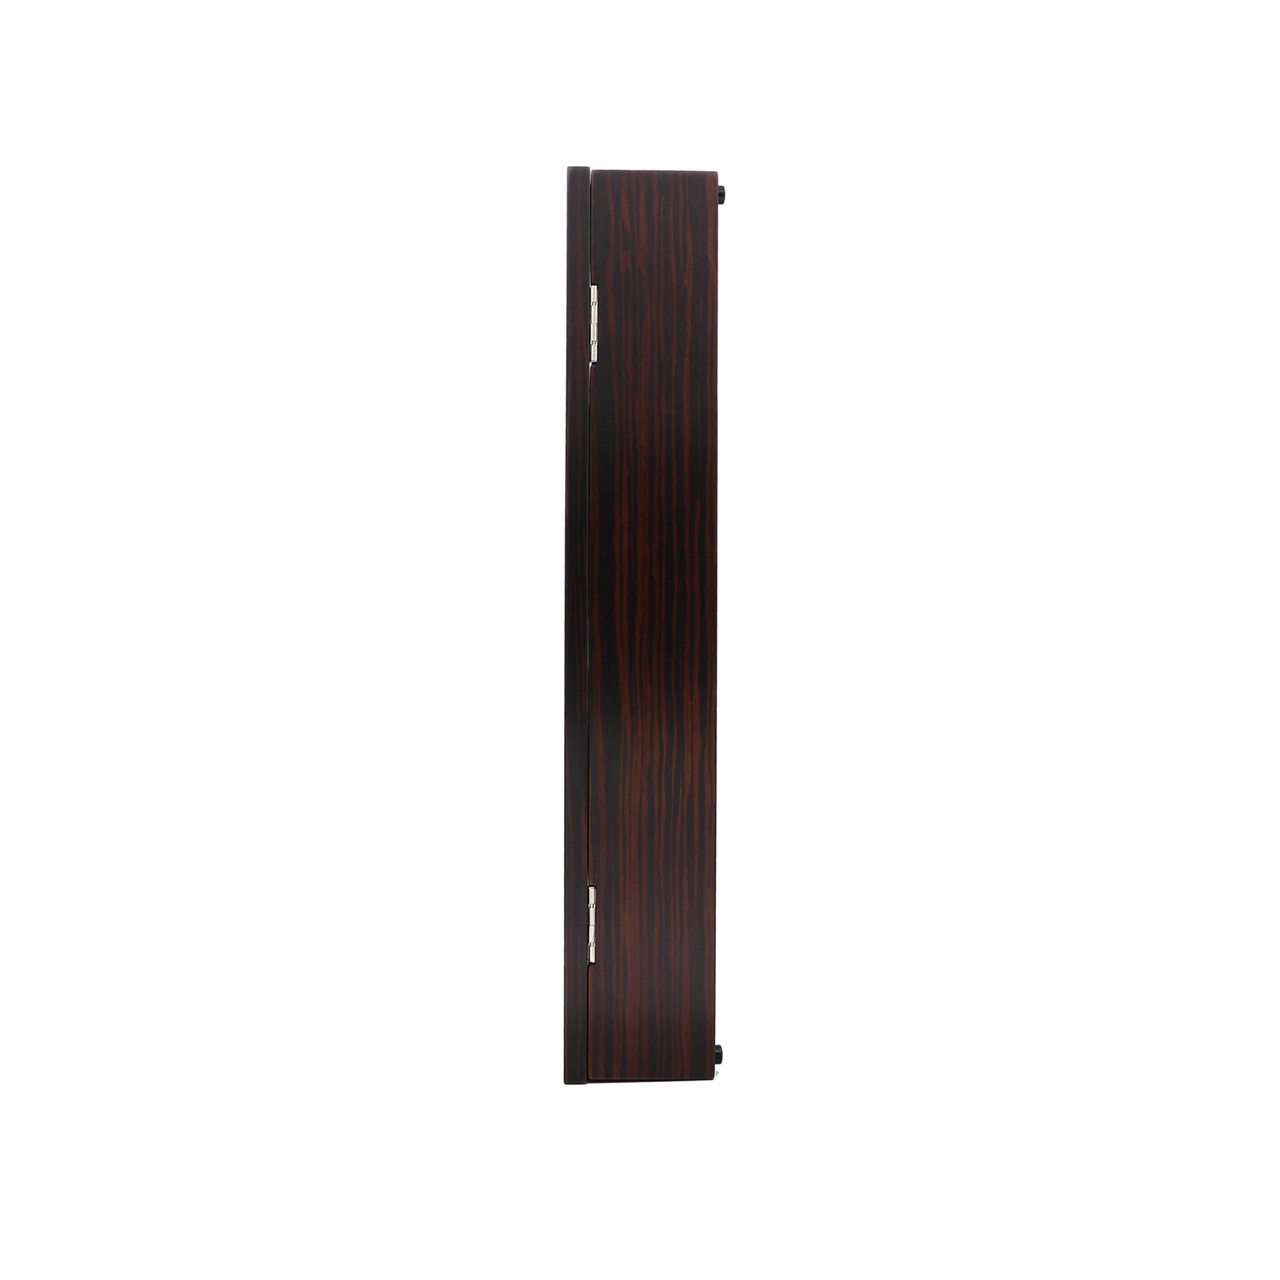 seiko-wall-clock-modern-wooden-pedulum-and-chime-brown-qxh046blh – 3.0